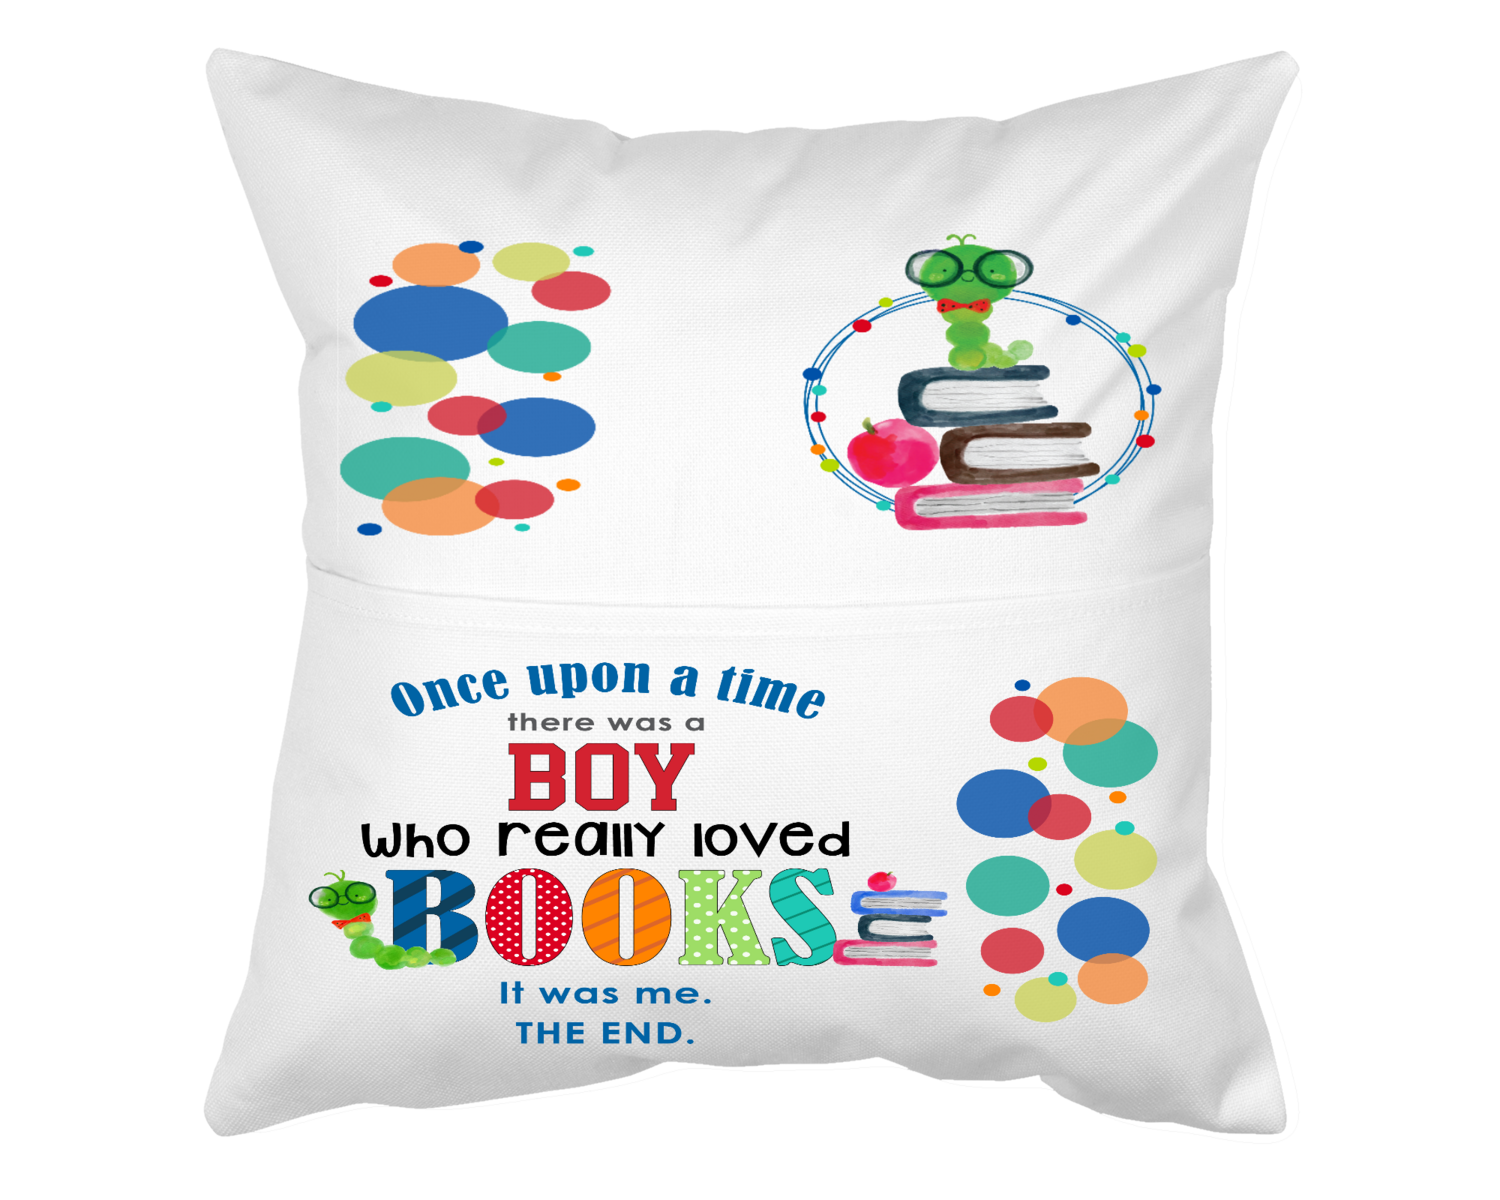 Pillow With Pocket: ONCE UPON A TIME THERE WAS A BOY/GIRL WHO REALLY LOVED BOOKS..IT WAS ME THE END BOY/GIRL